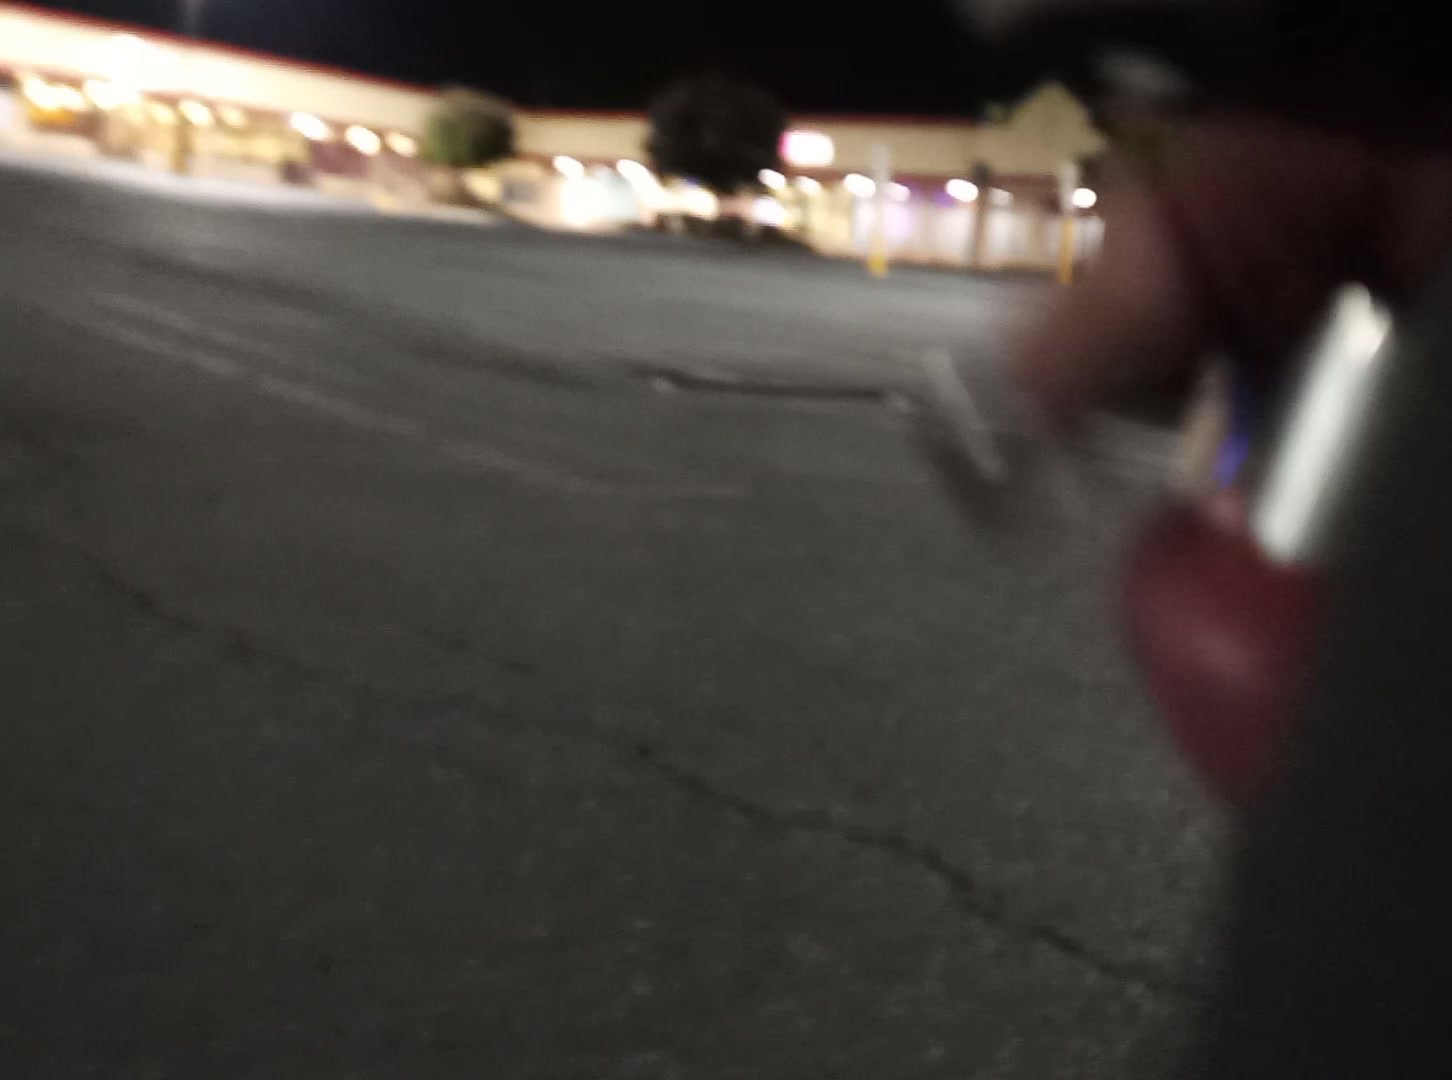 Risky cock & balls exposed in shopping parking lot